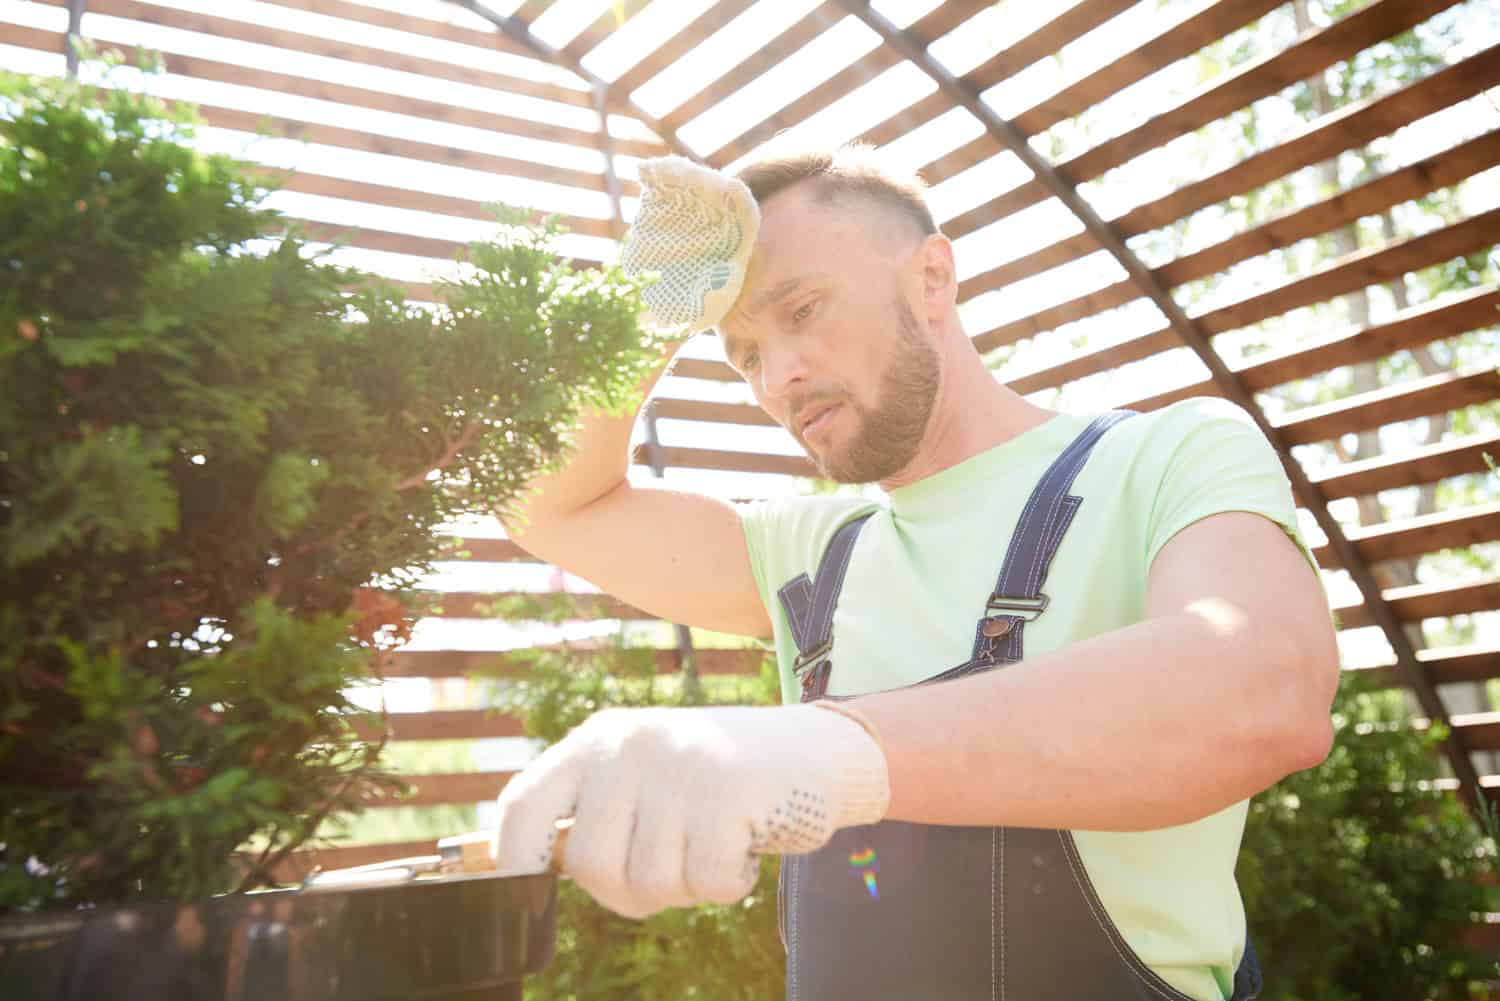 A man sweating and working in a greenhouse.